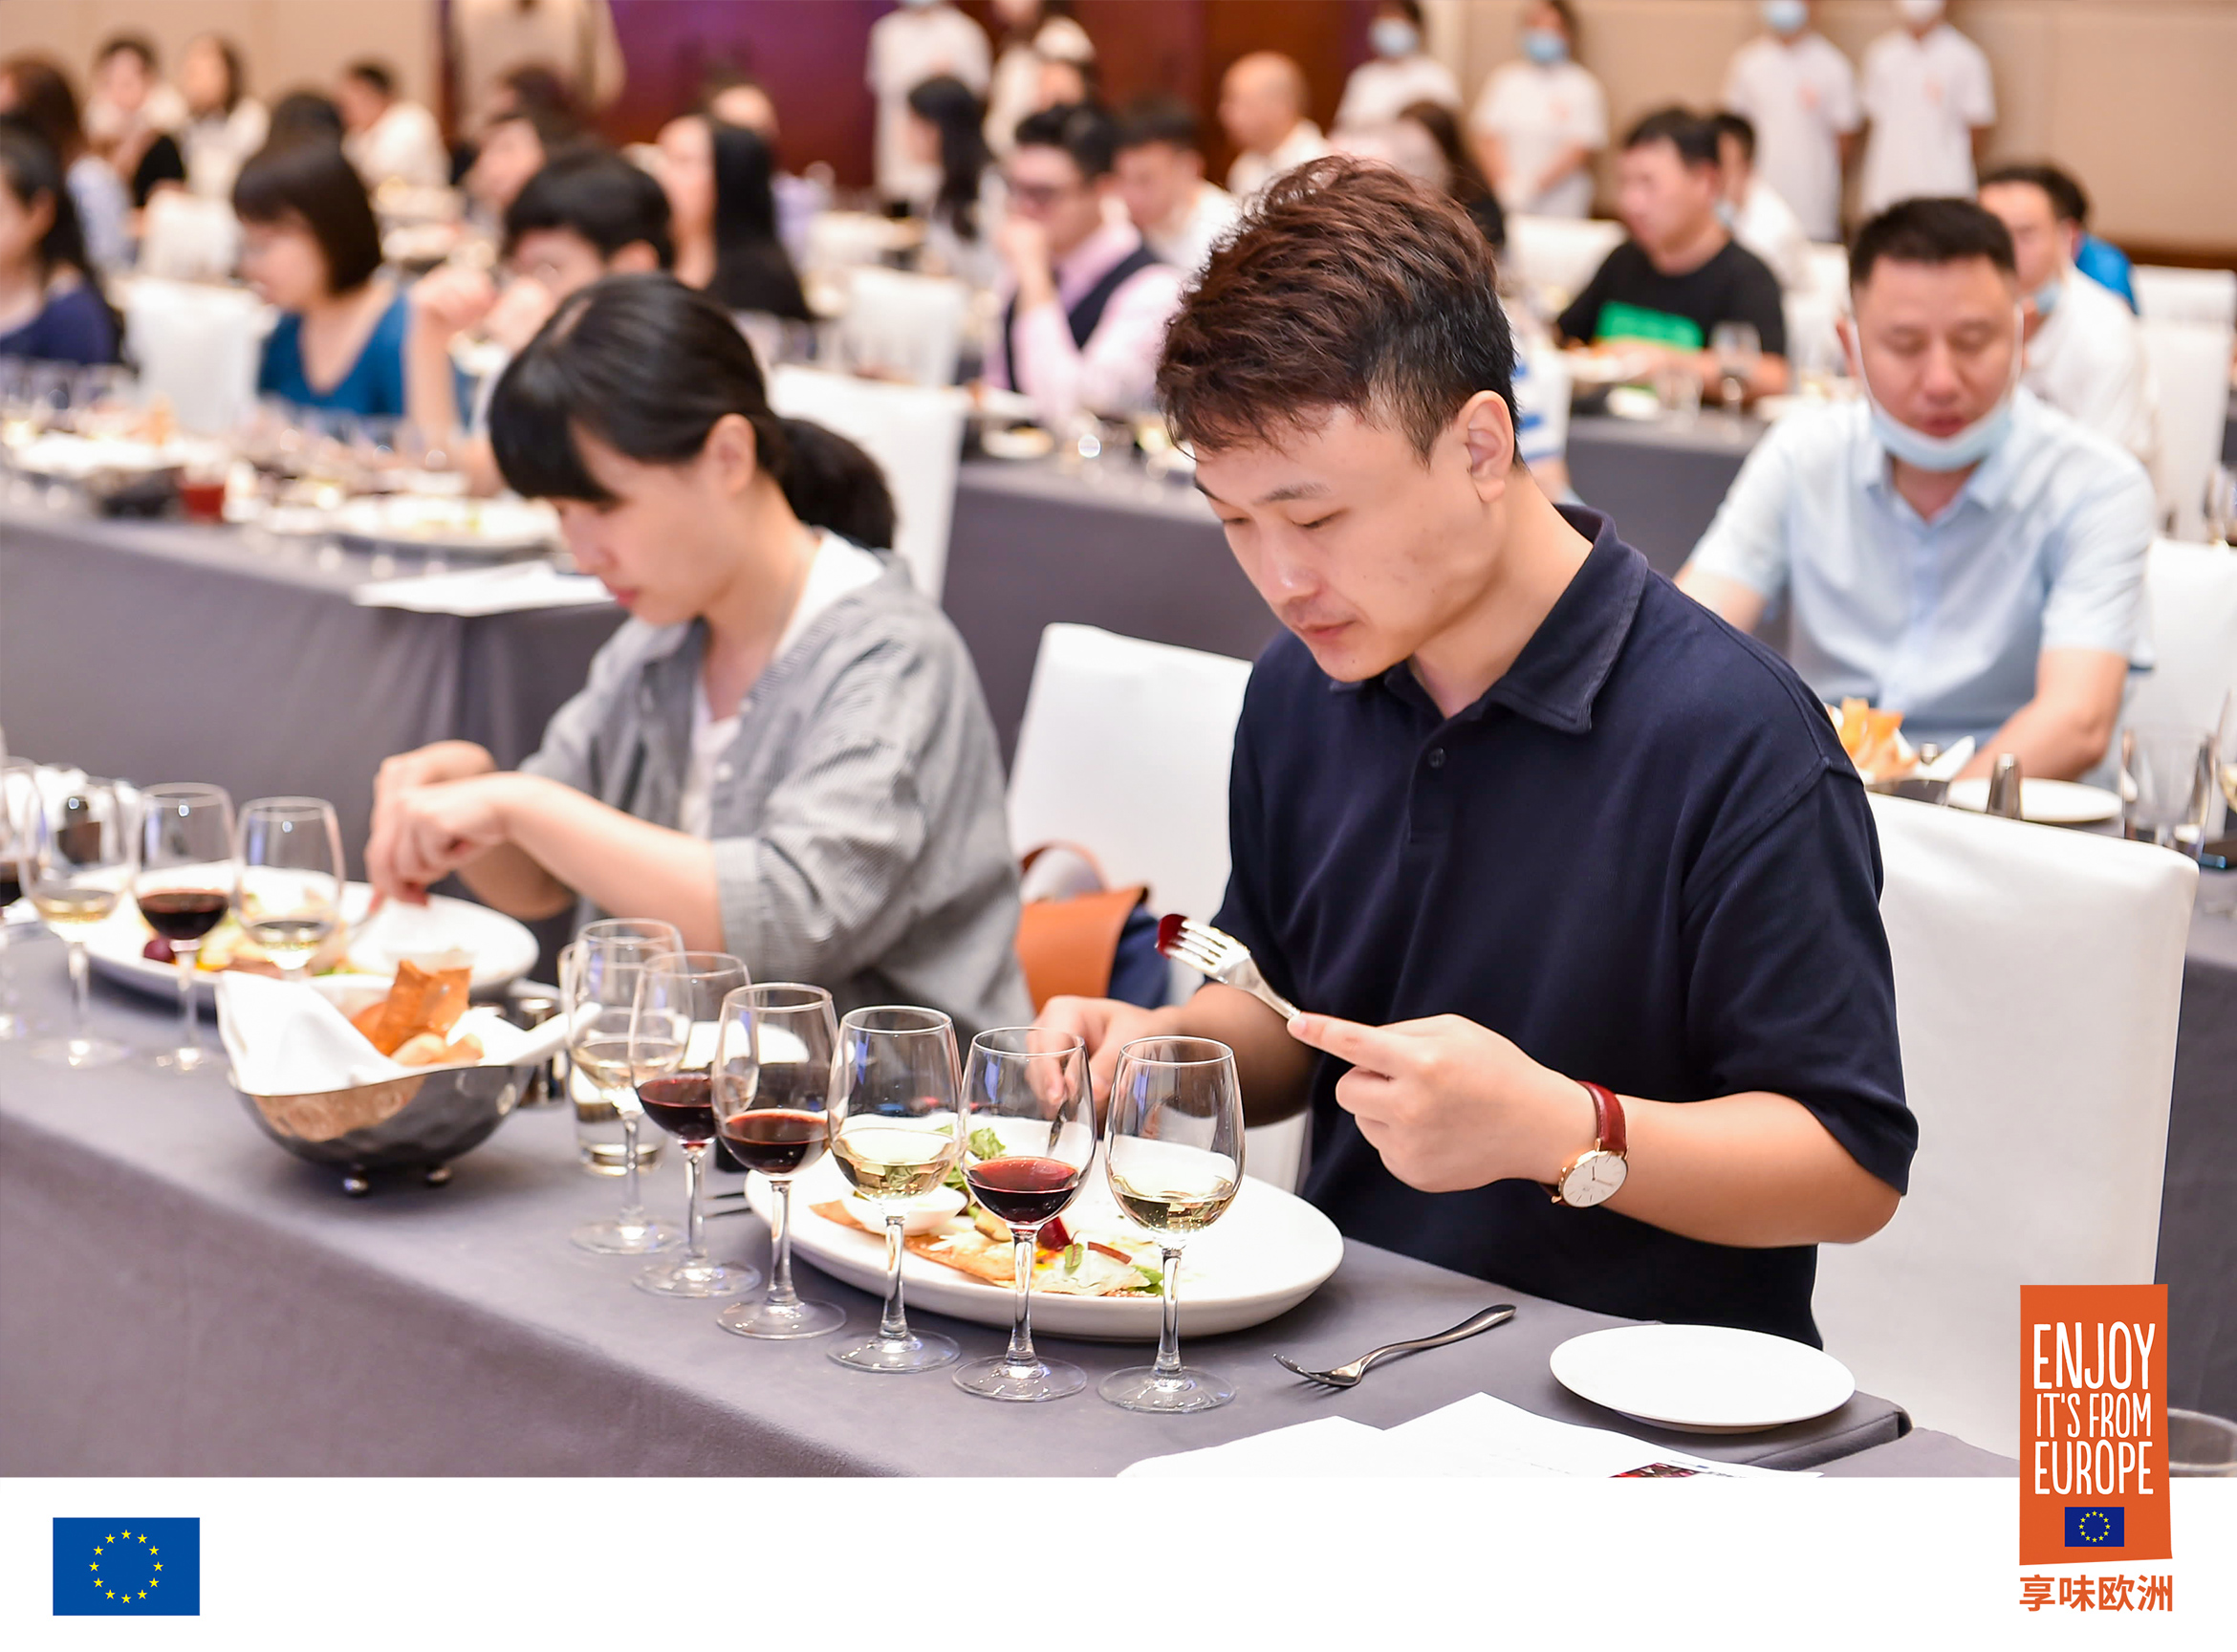 Participants tasting dishes and wine.